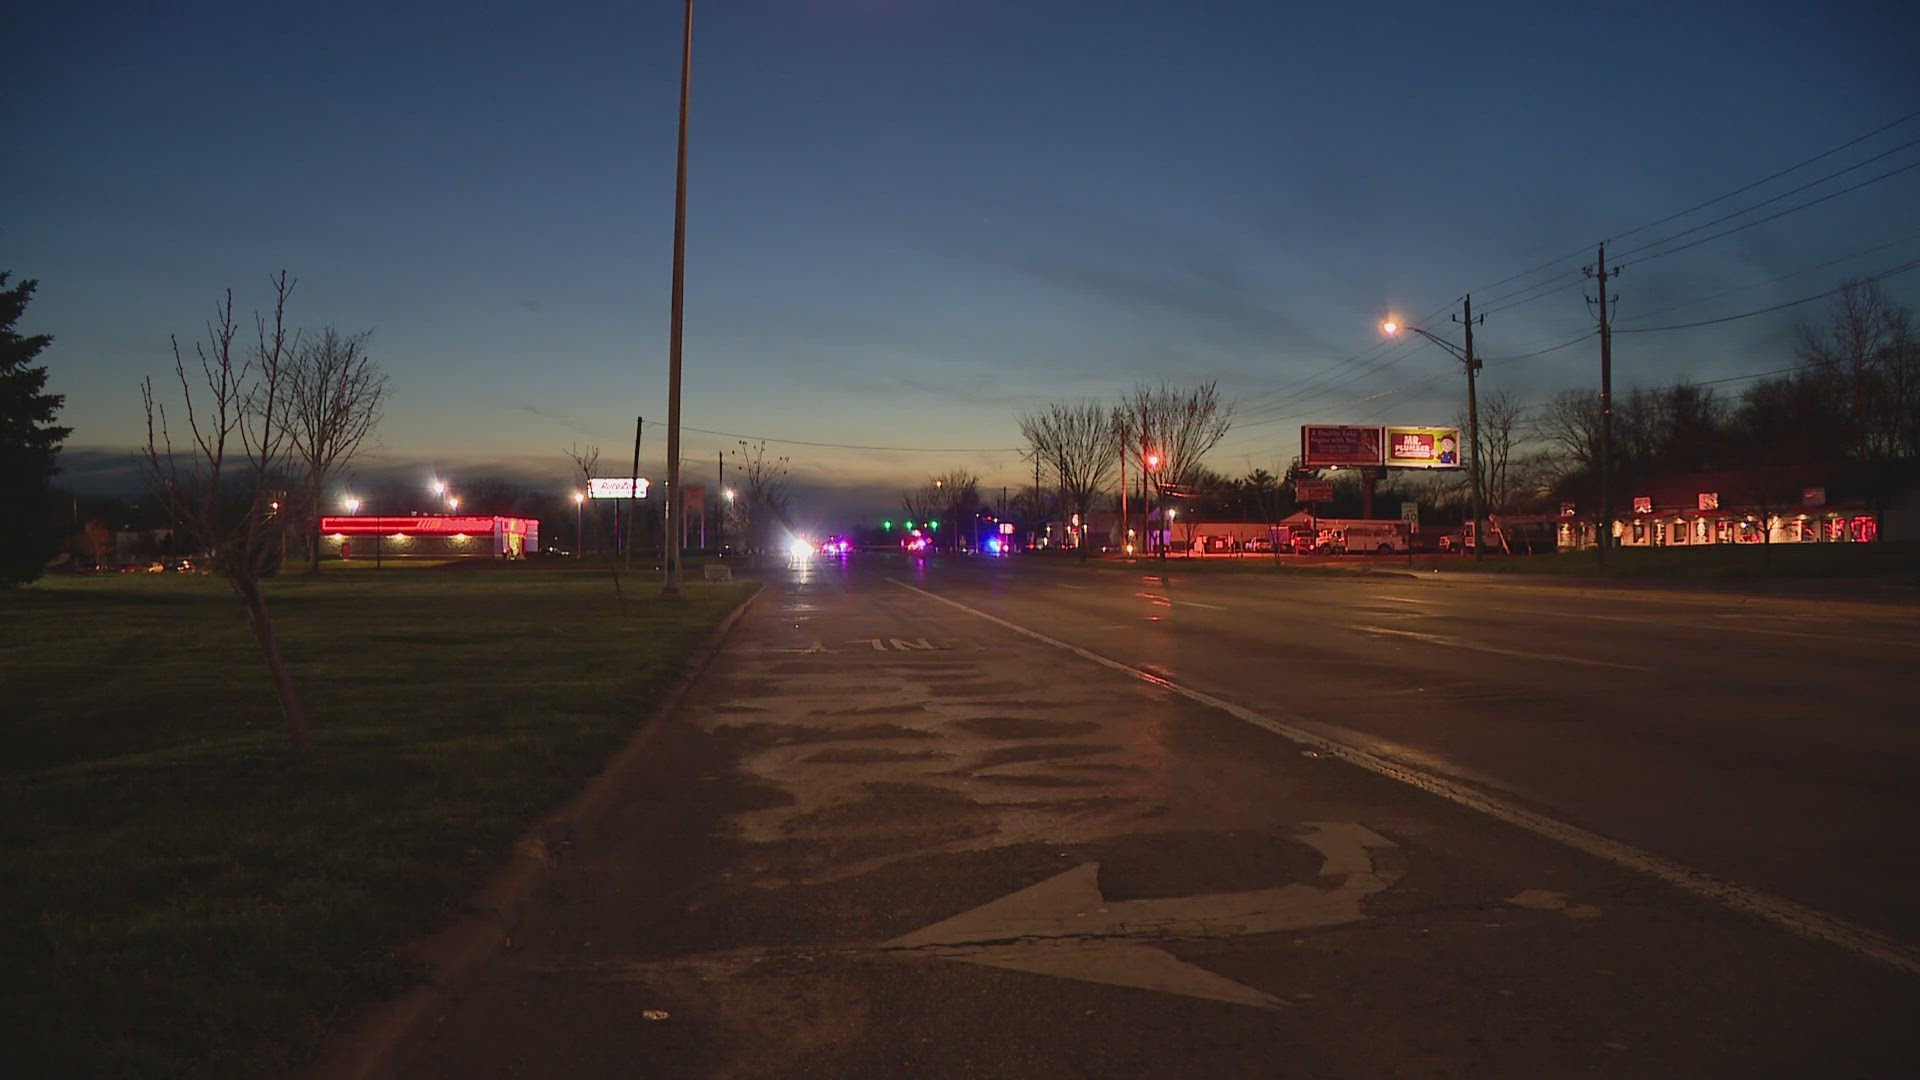 The crash happened shortly before 8 p.m. on Sunday, March 24 near East Raymond Street and South Sherman Drive on the southeast side of Indianapolis.